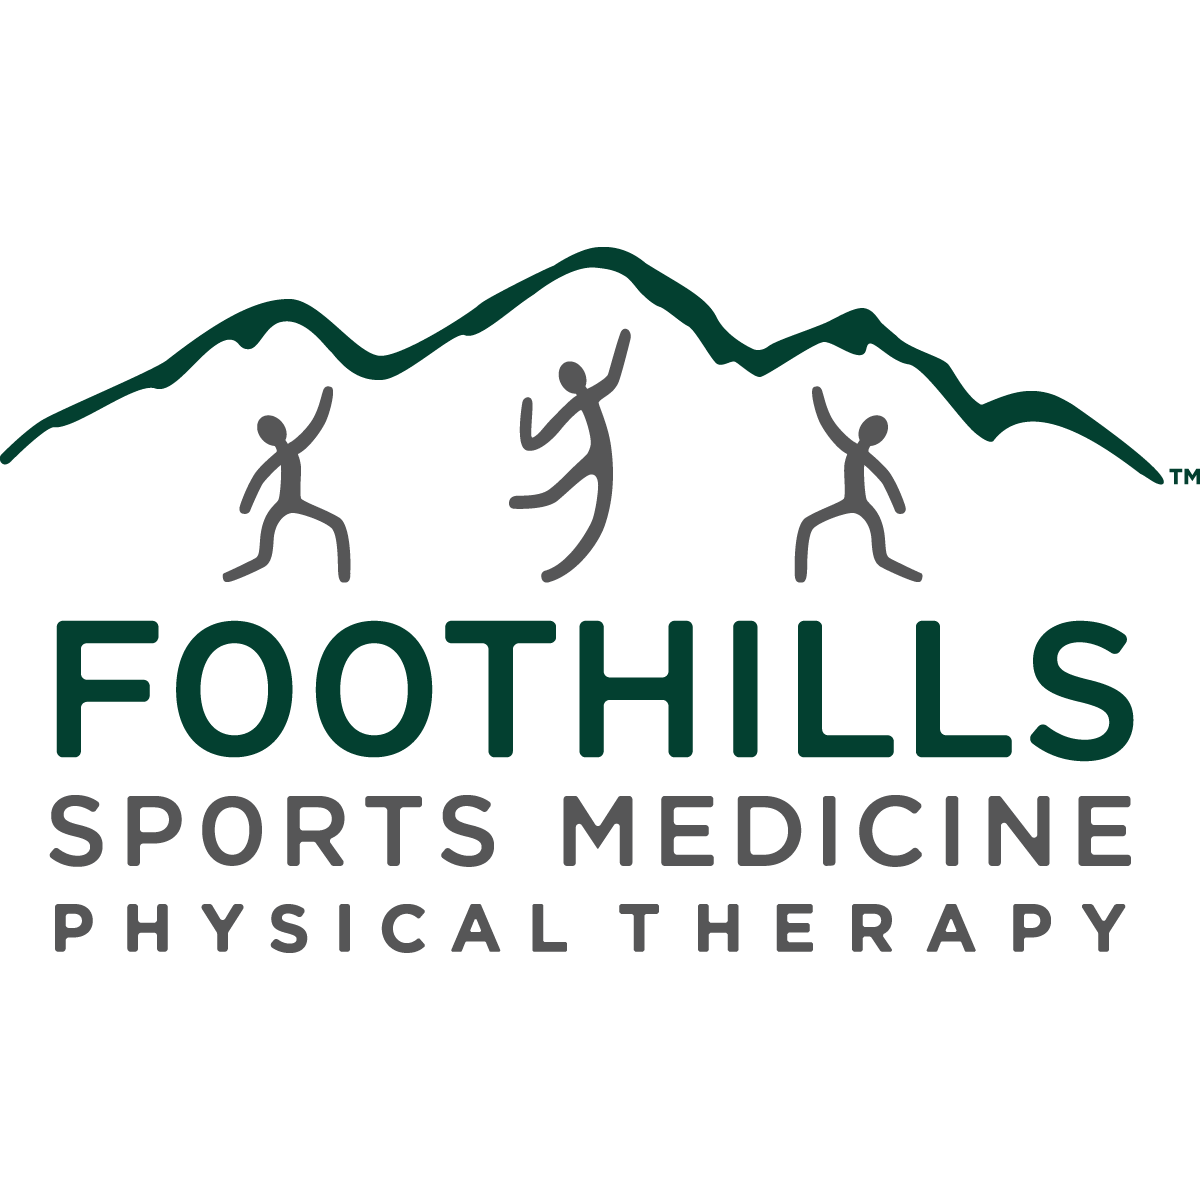 Foothills Physical Therapy & Sports Medicine - Glendale, AZ 85310 - (623)322-8925 | ShowMeLocal.com